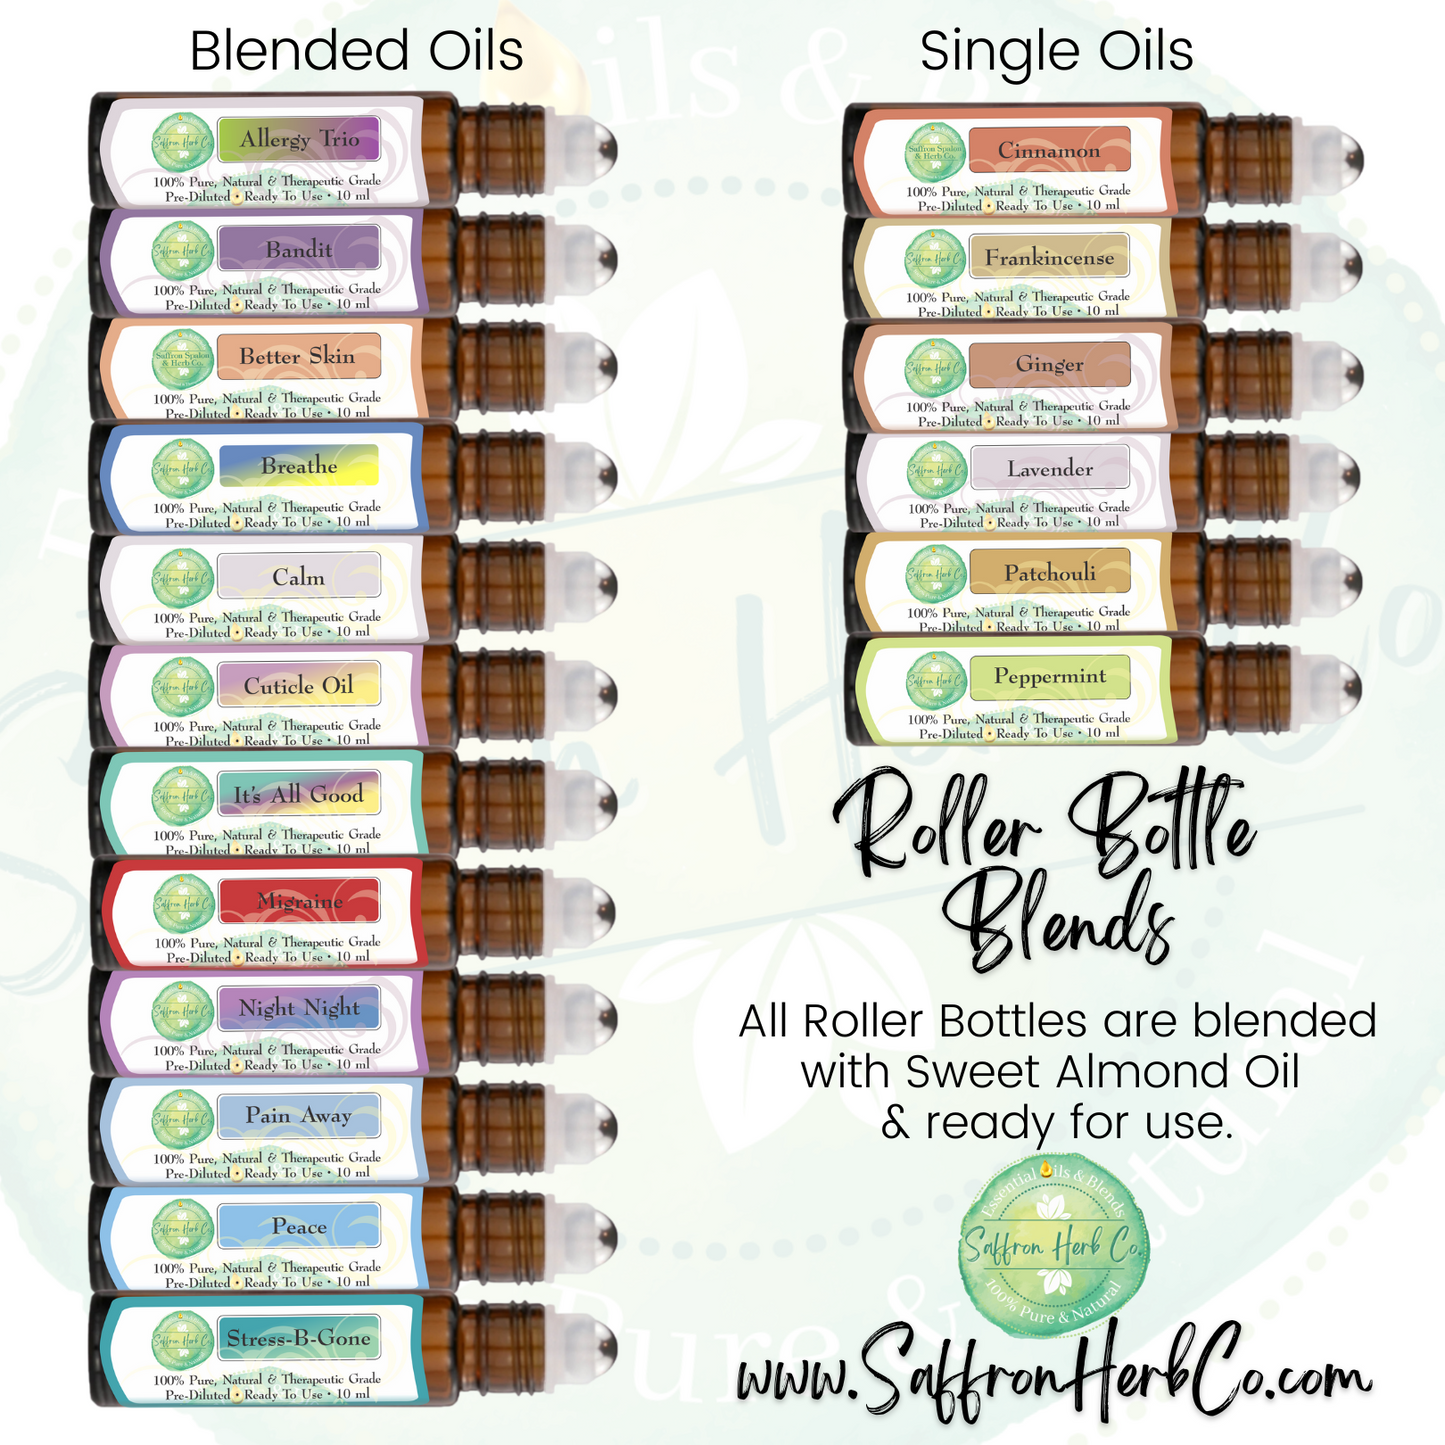 Allergy Trio™ Essential Oil Roller Bottle Blend • 100% Pure & Natural • Pre-Diluted • Ready To Use